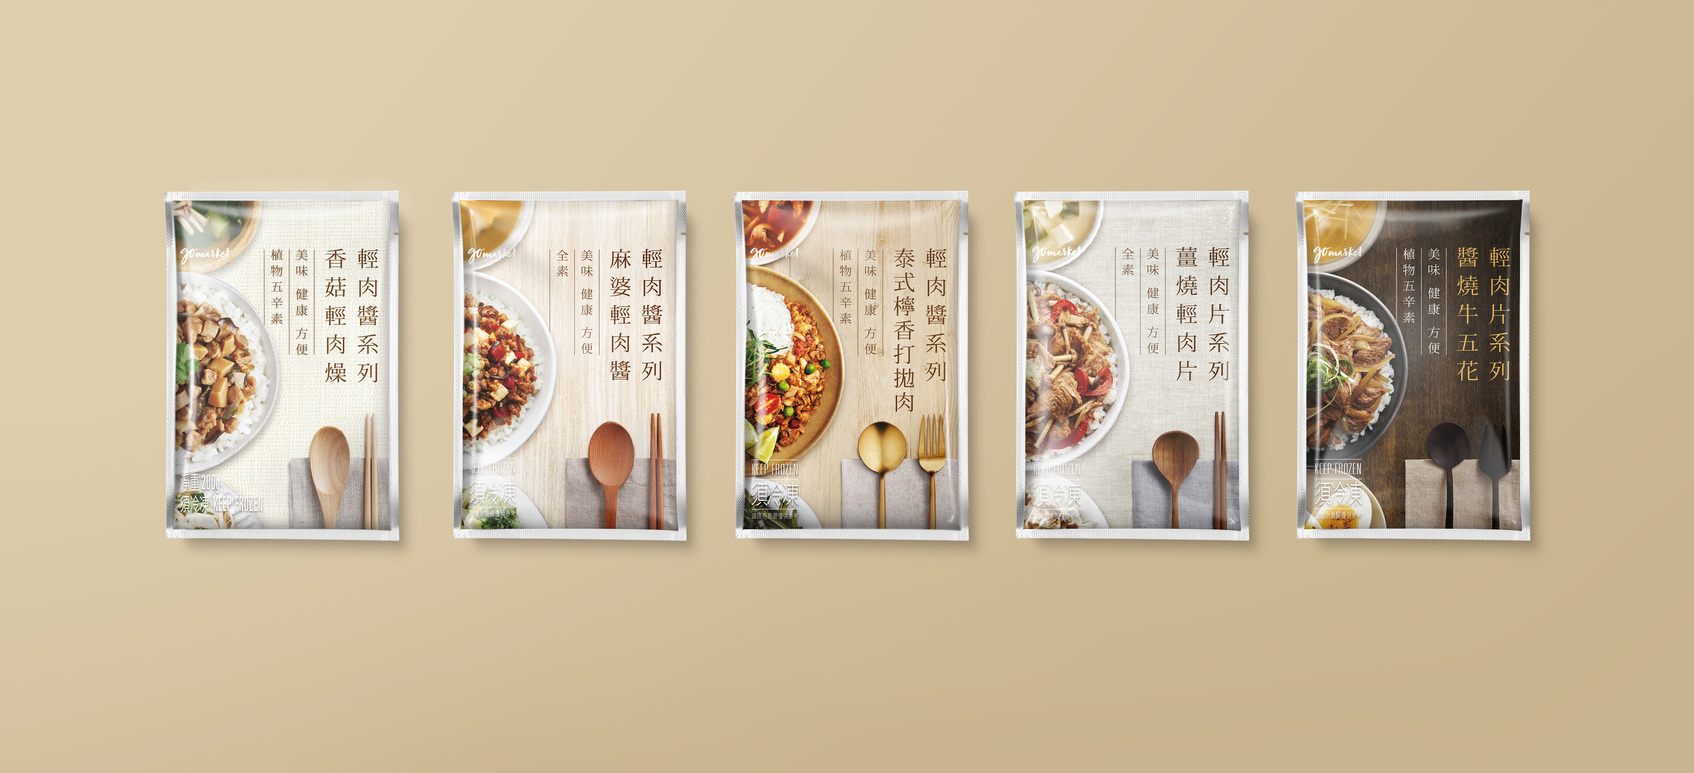 LIGHT MEAT (PLANT-BASED MEAT) SERIES PACKAGE DESIGN-1